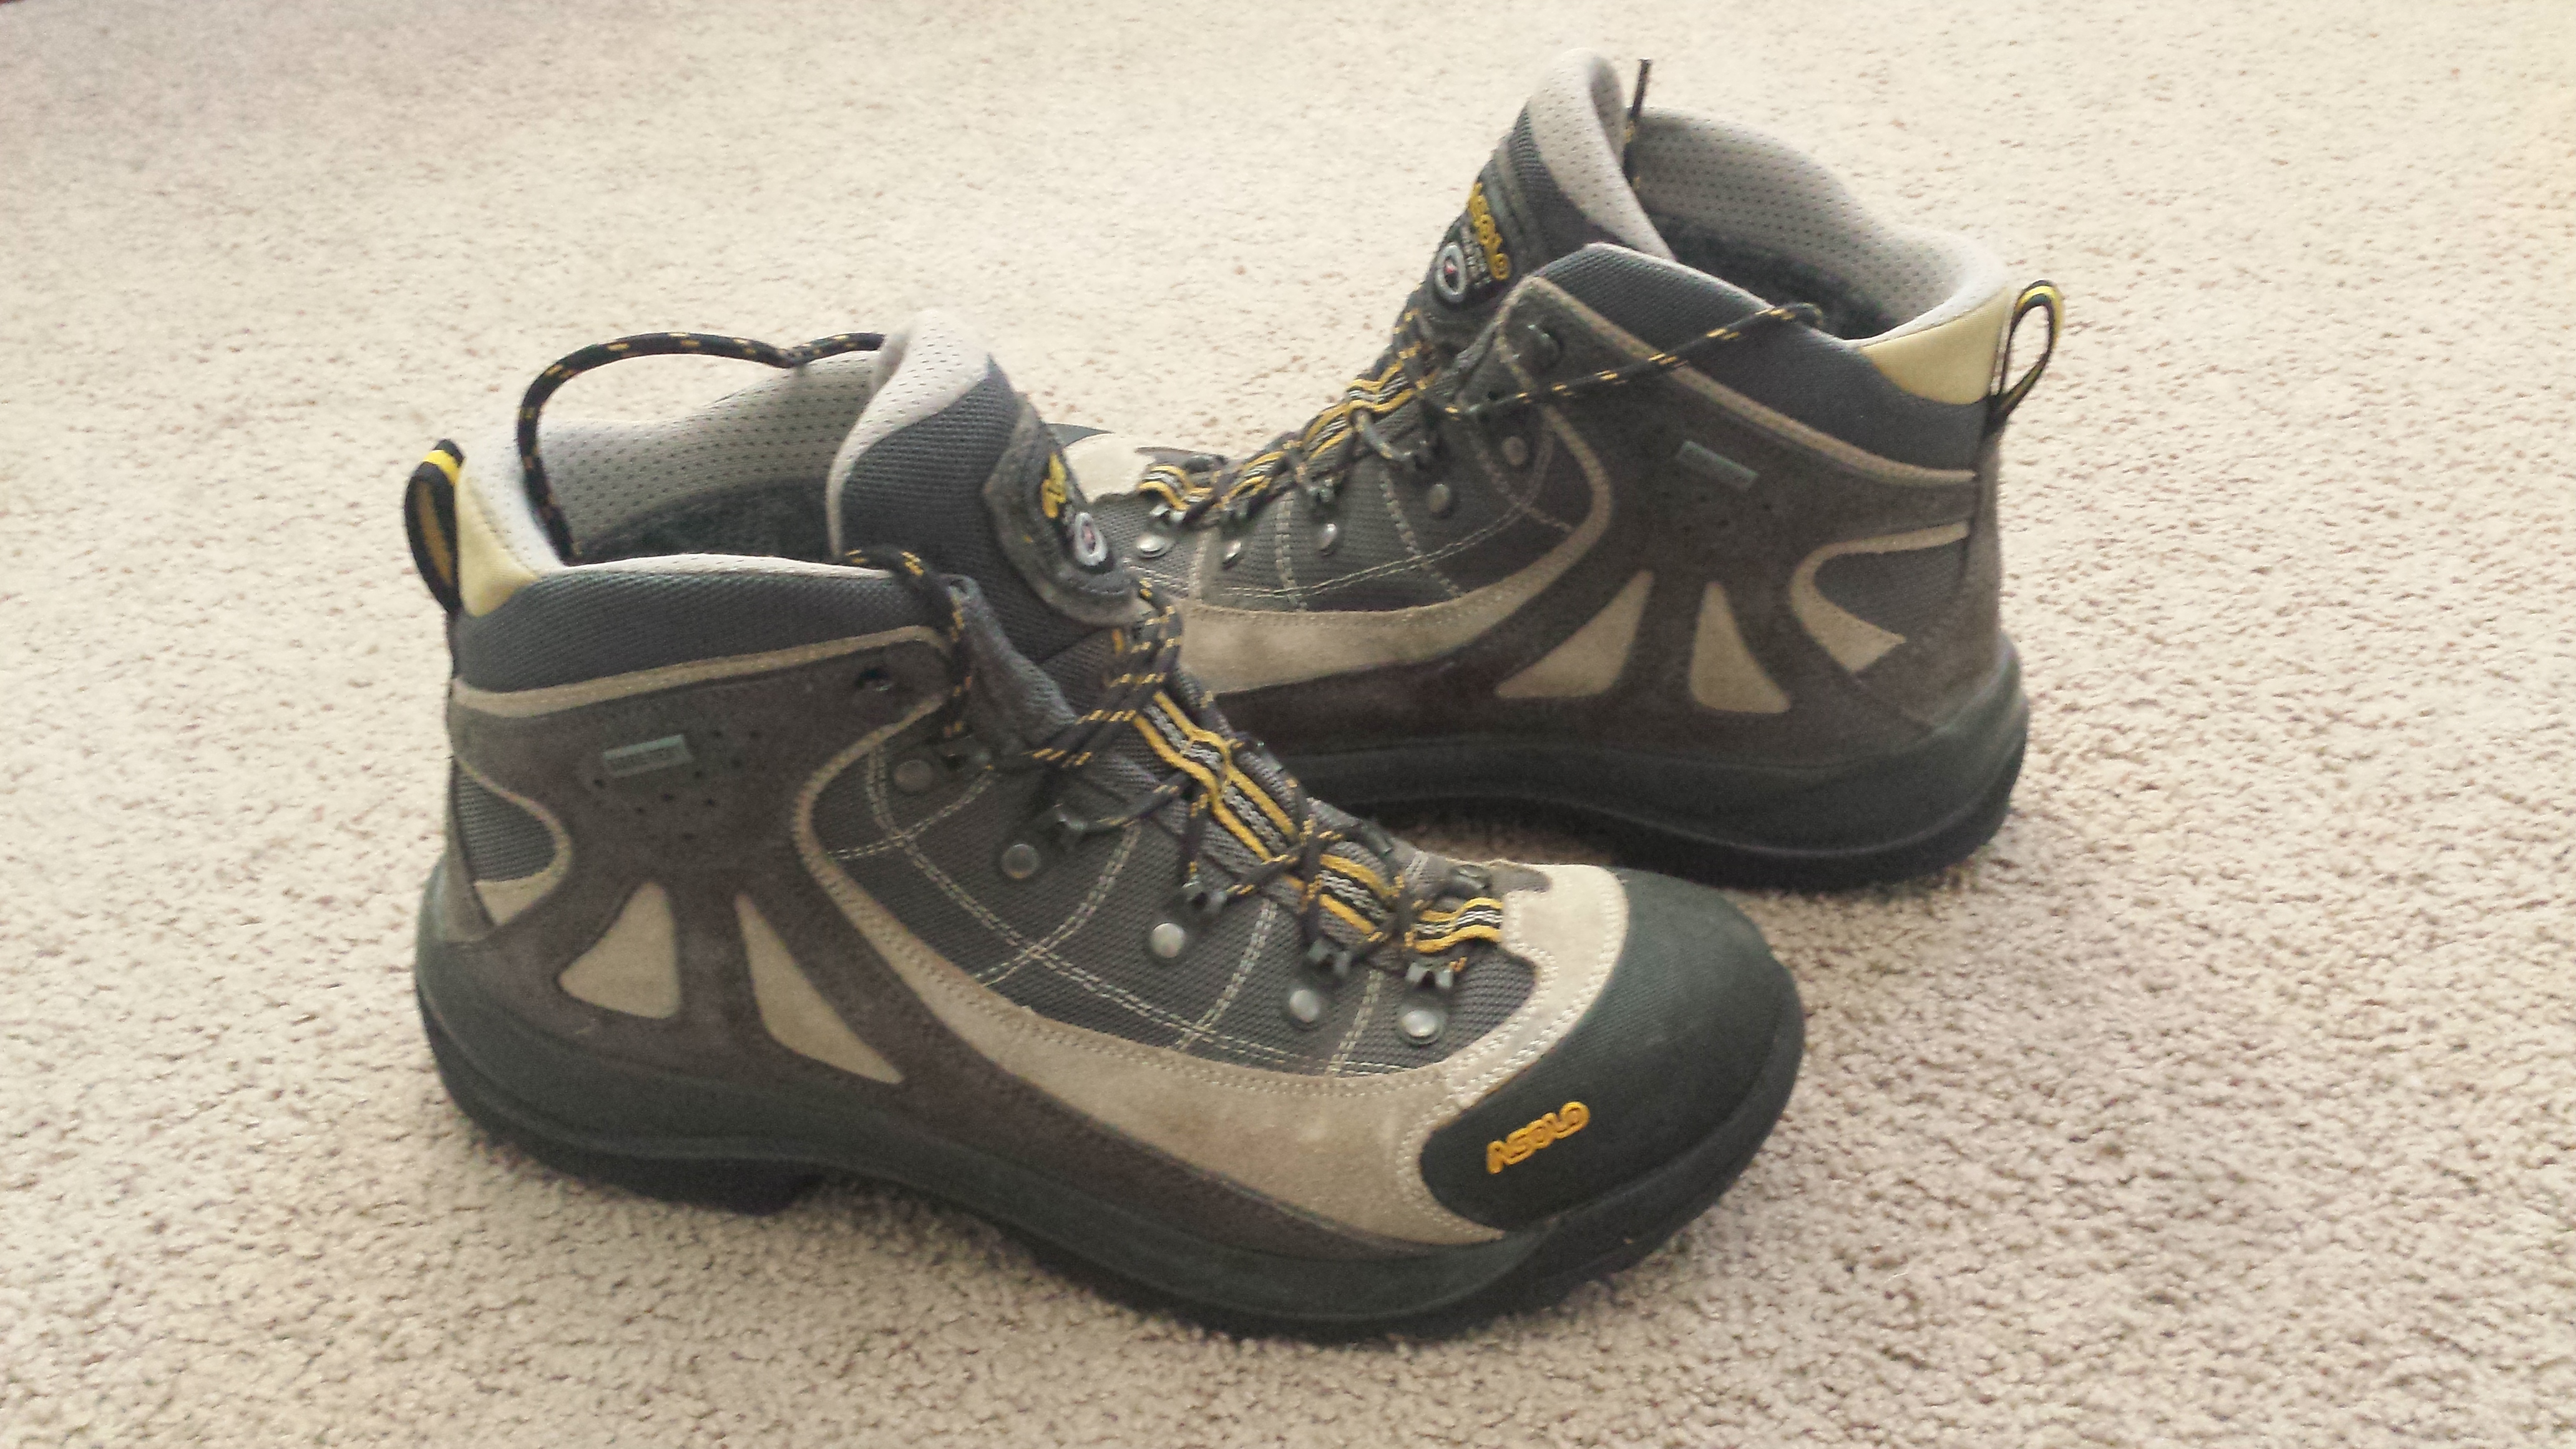 Asolo boots for Shasta